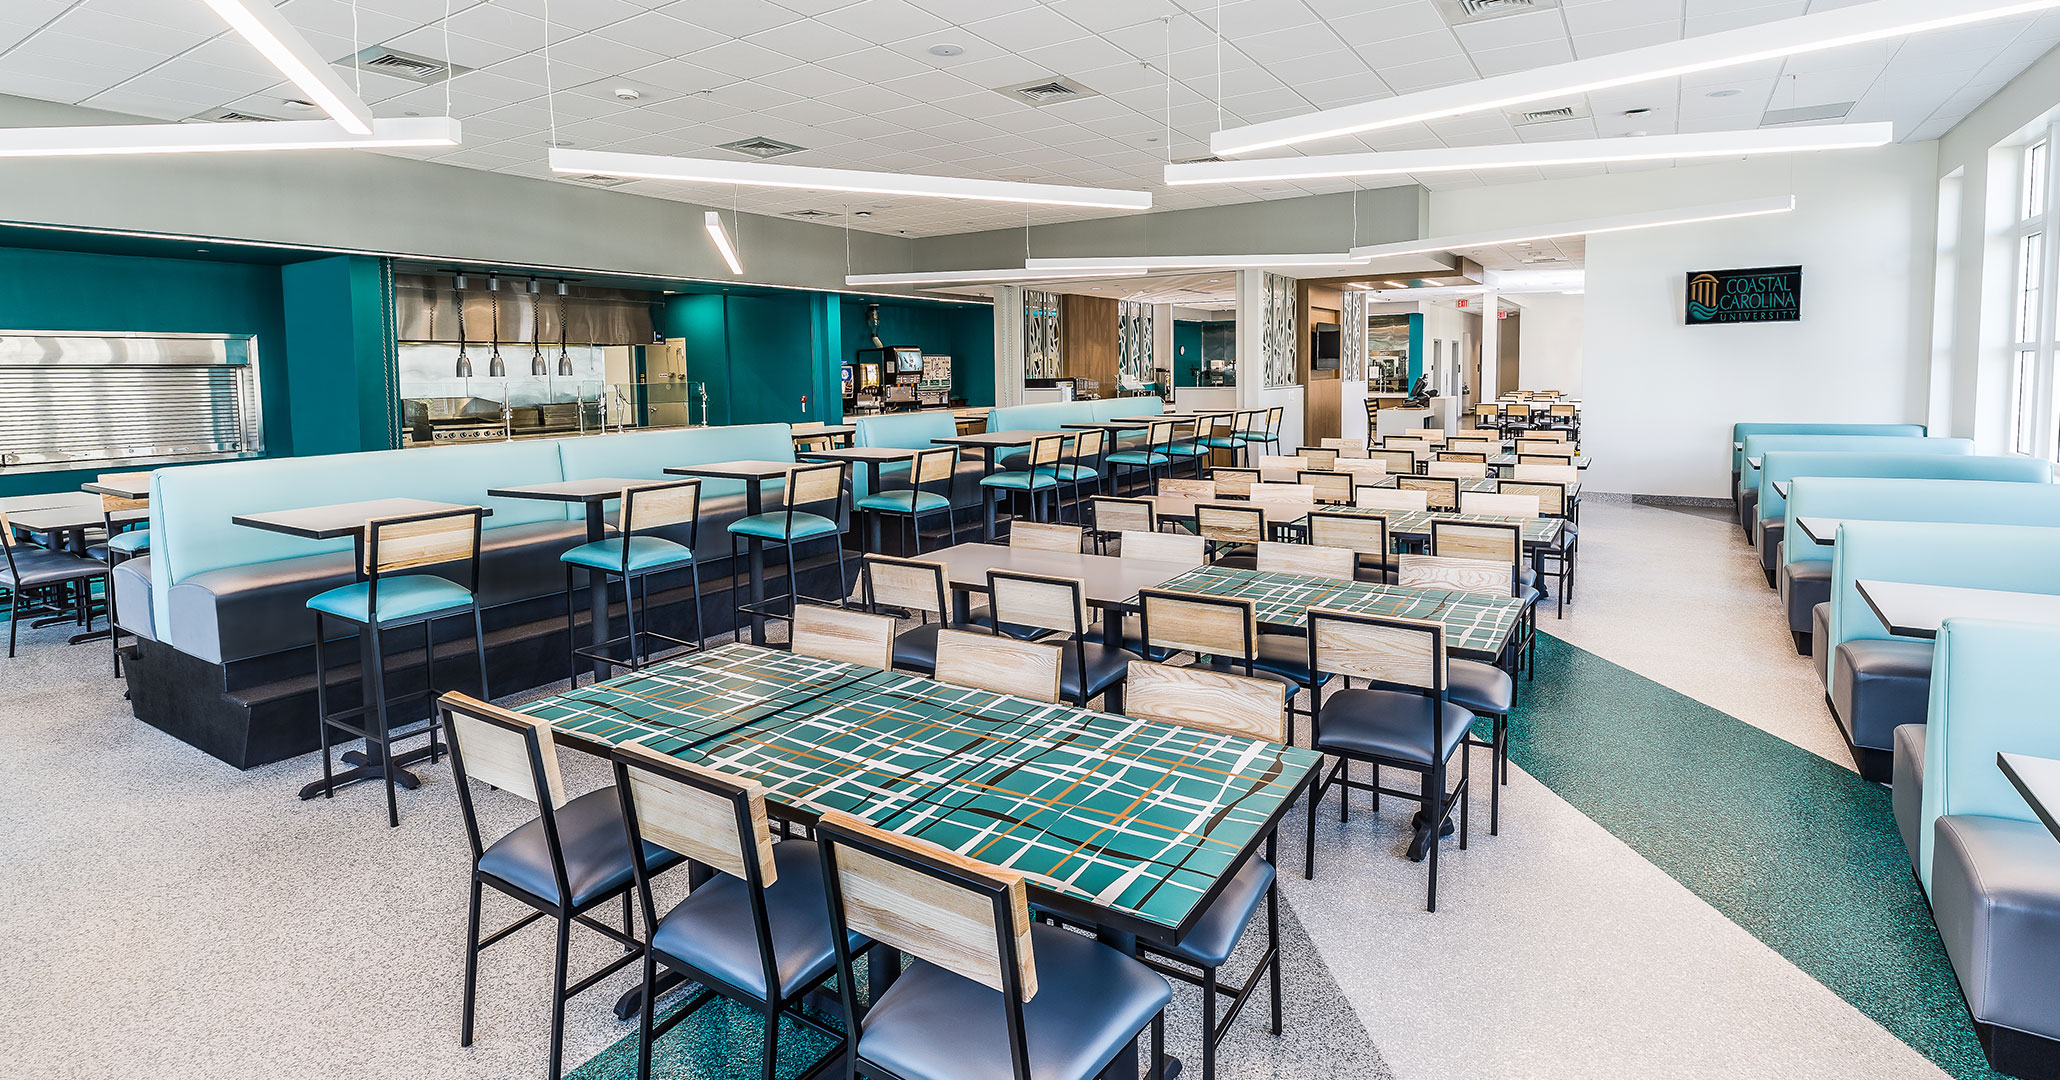 Boudreaux architects designed the student cafeteria’s interiors for Coastal Carolina’s new Dining Hall.